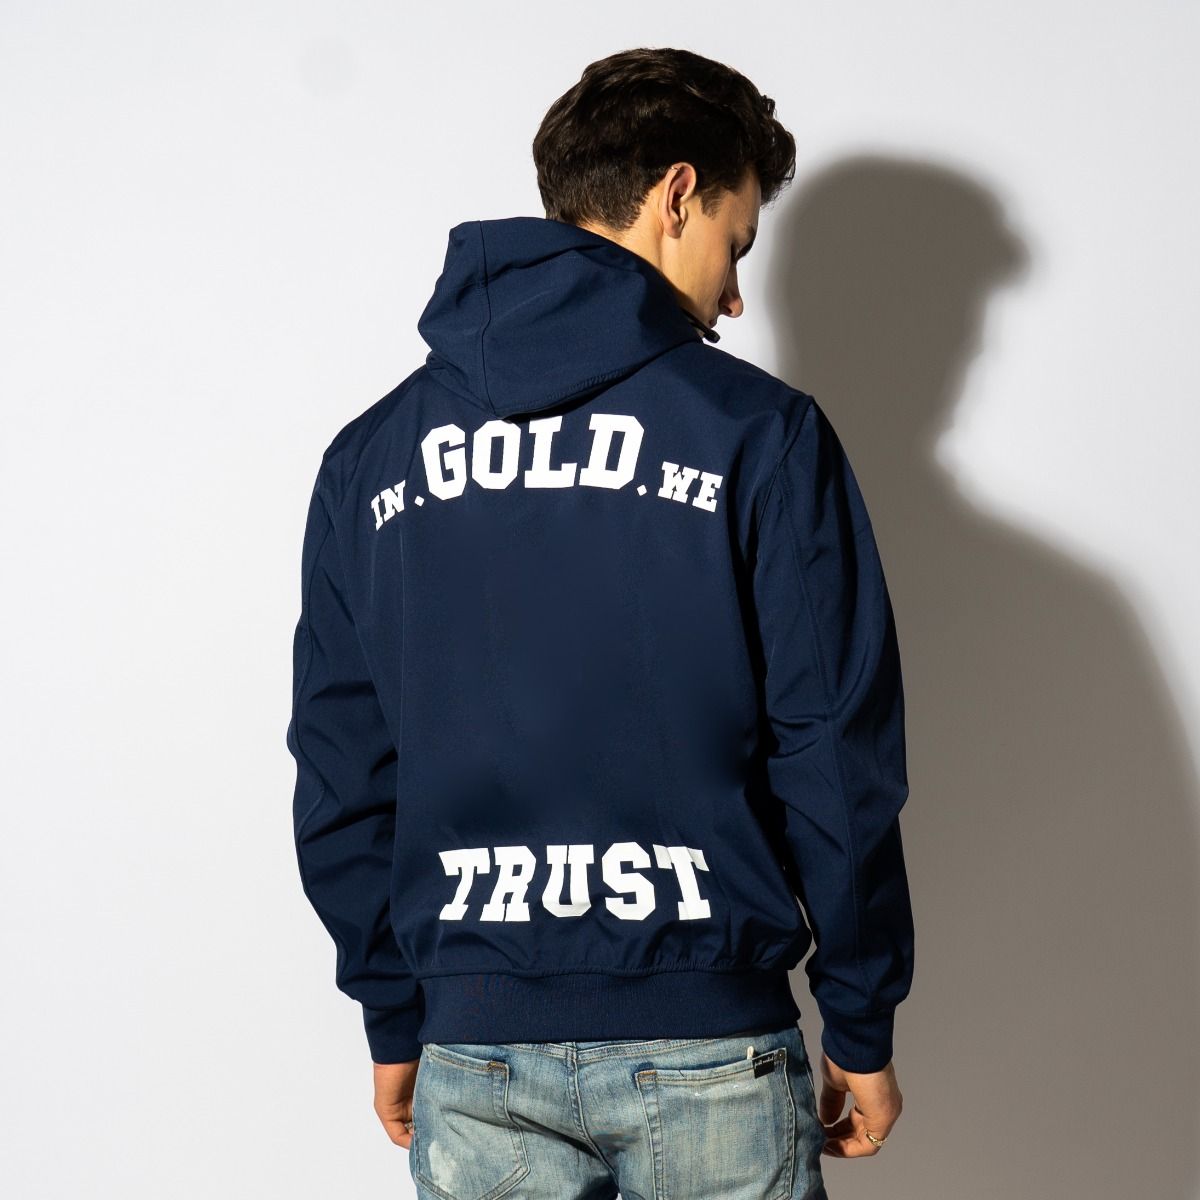 In Gold Trust The Gift Softshell | Sale